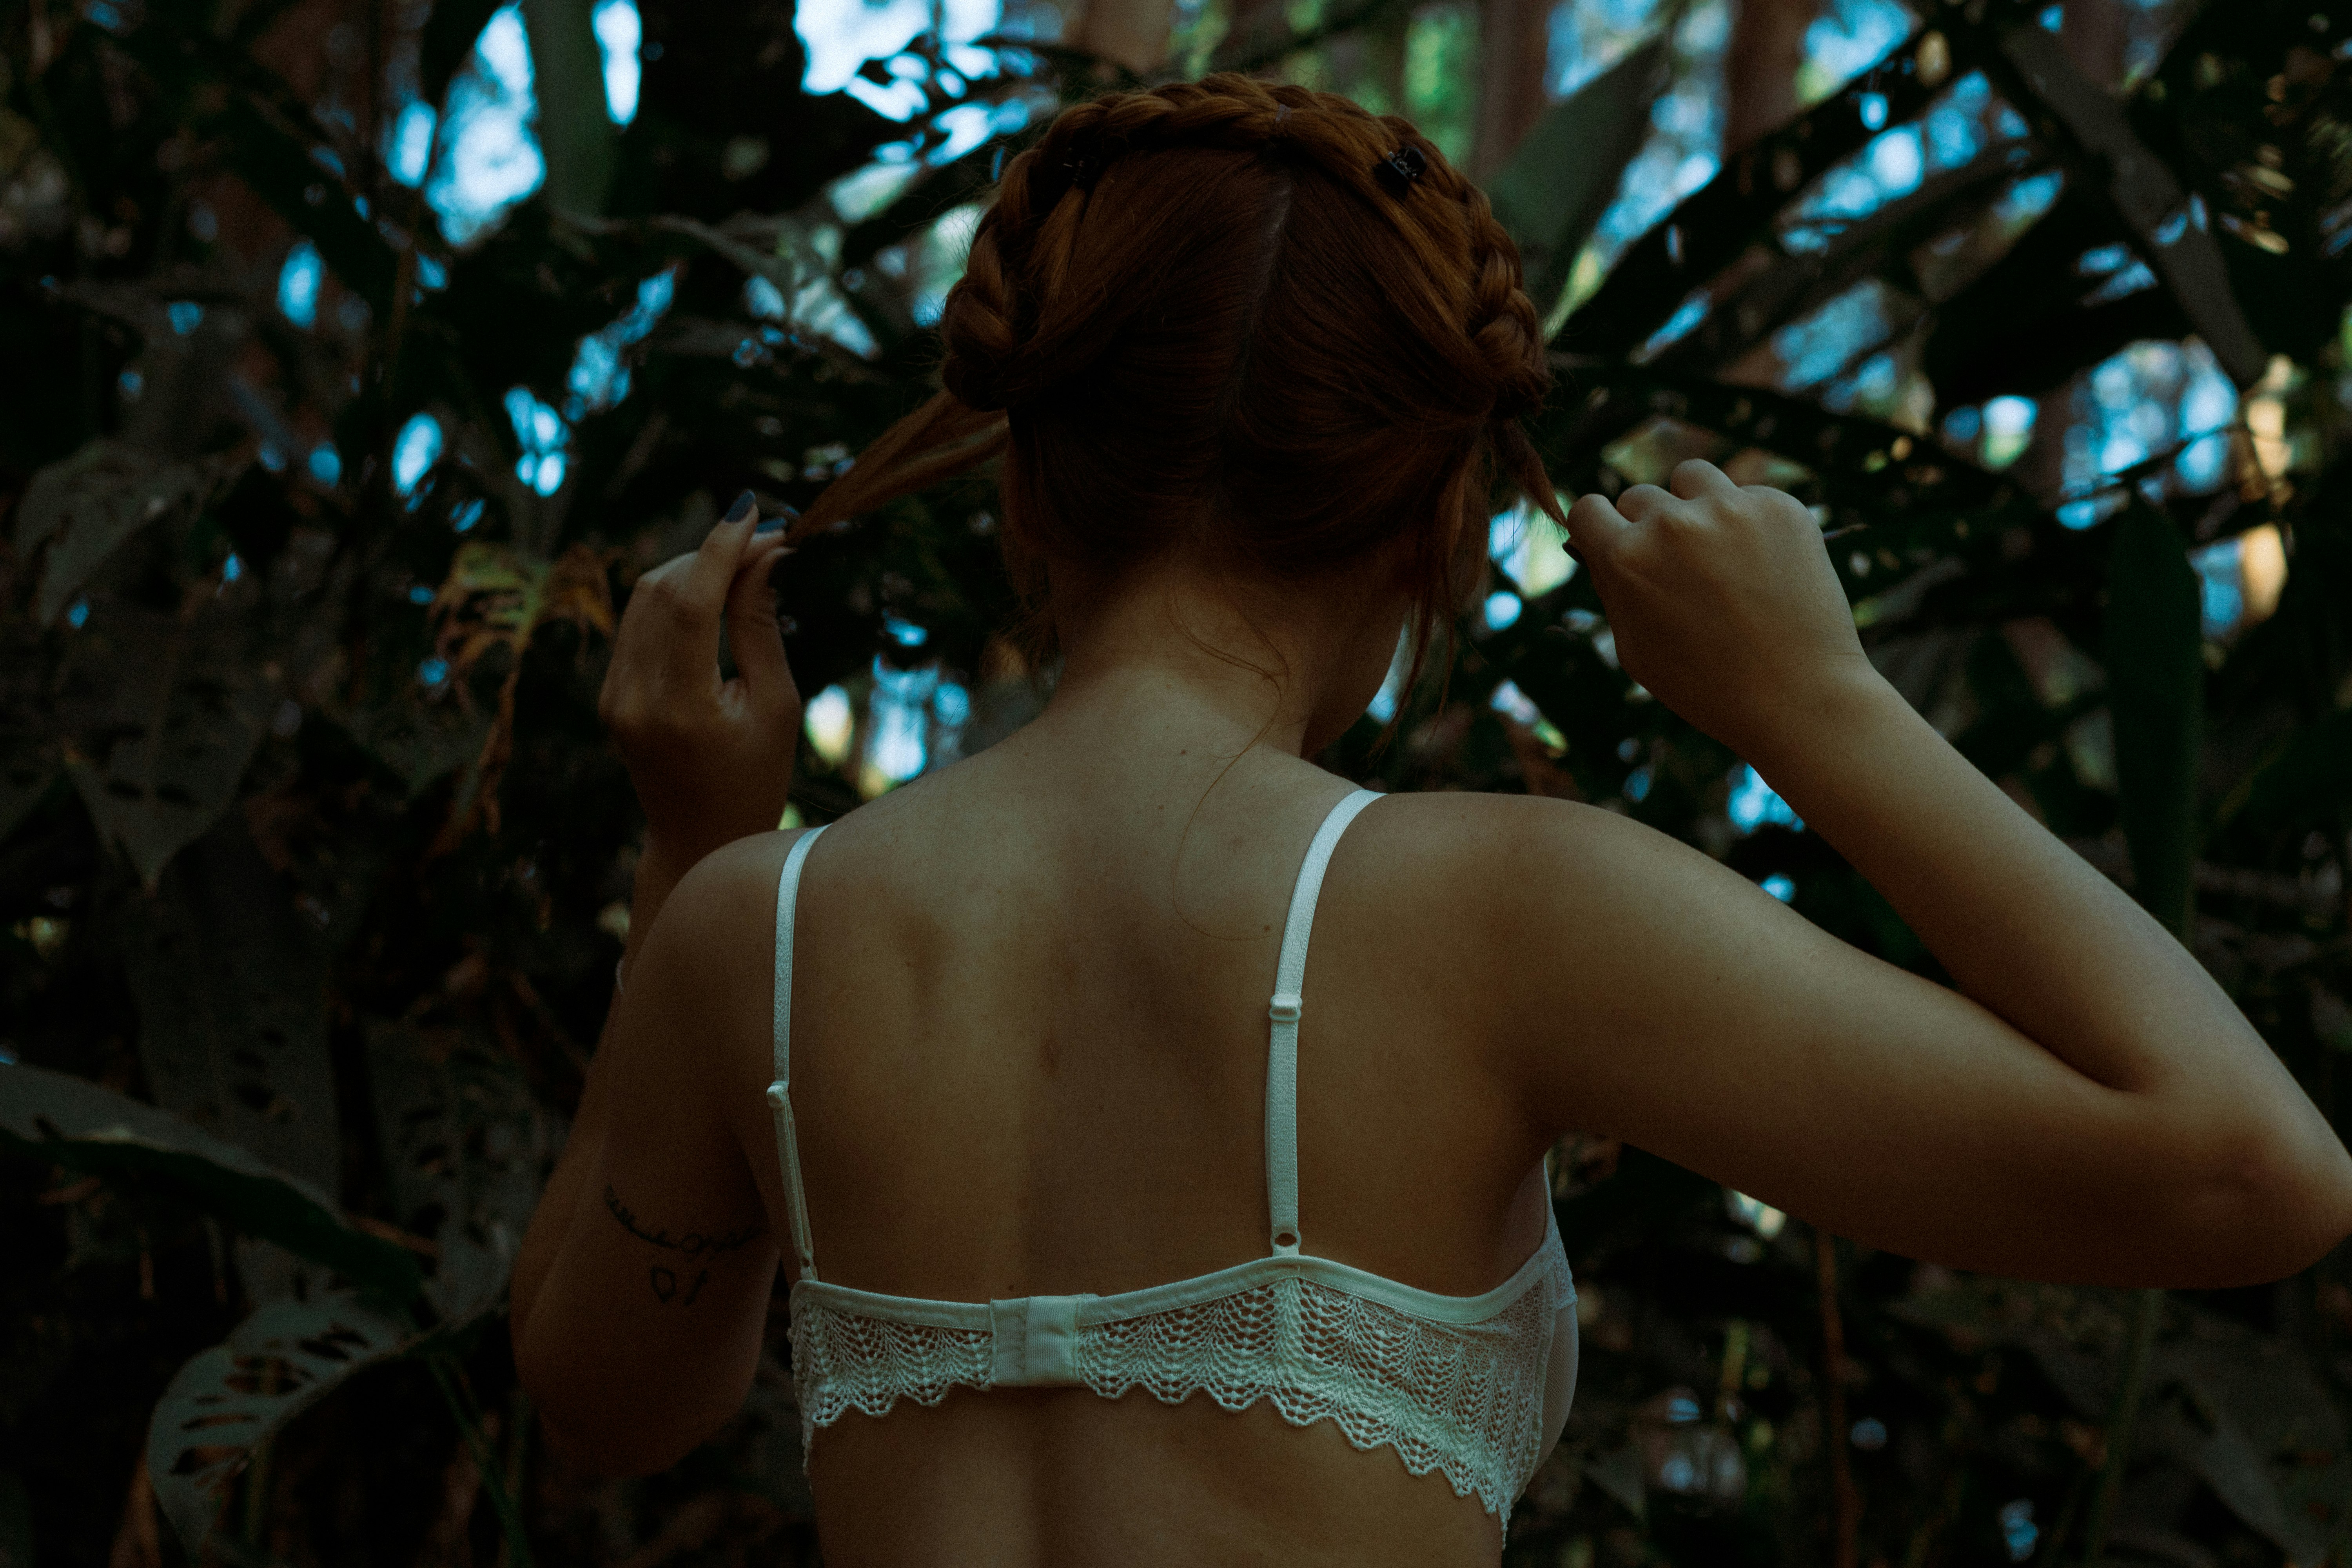 woman in white lace brassiere standing near green leaf tree during daytime